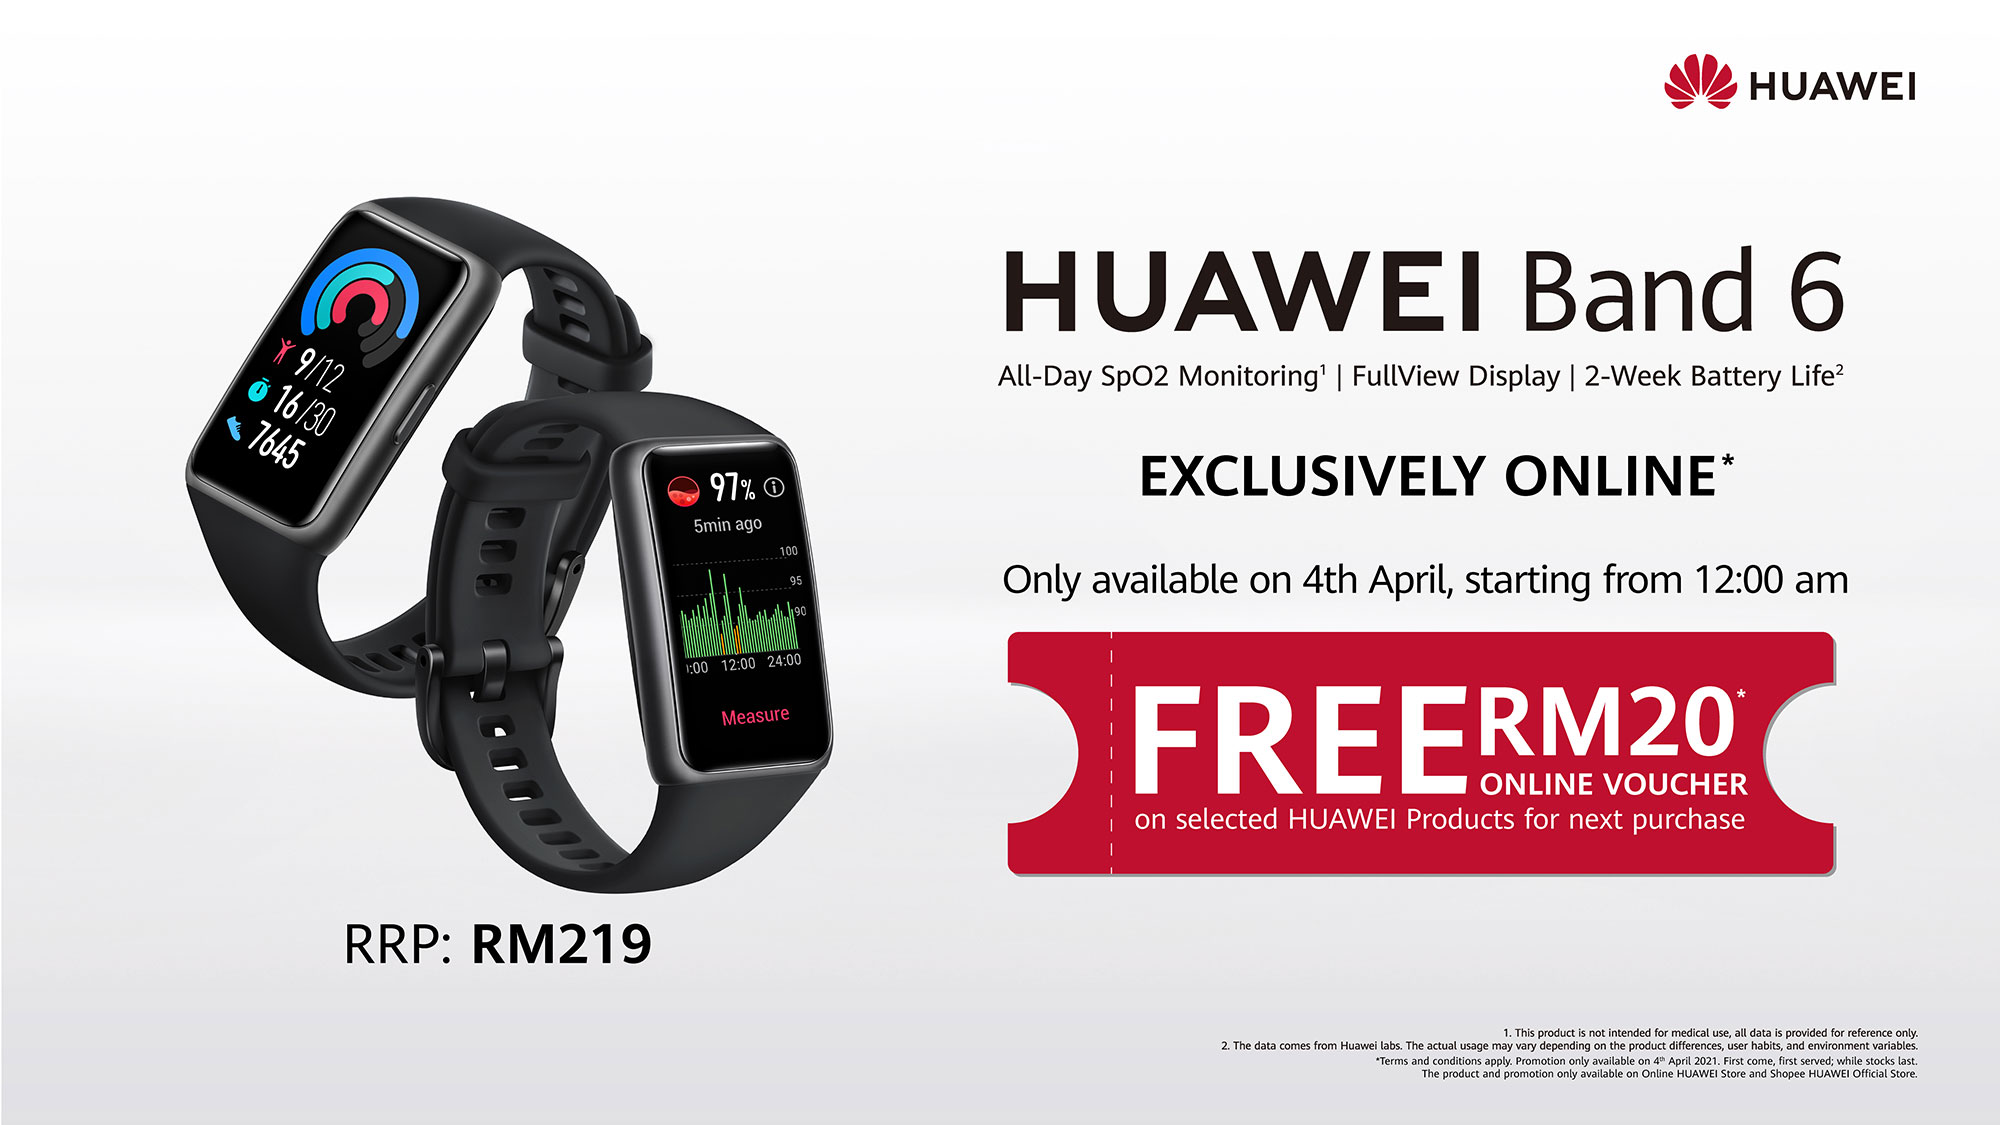 HUAWEI Band 6 Available Exclusively Online on April 4